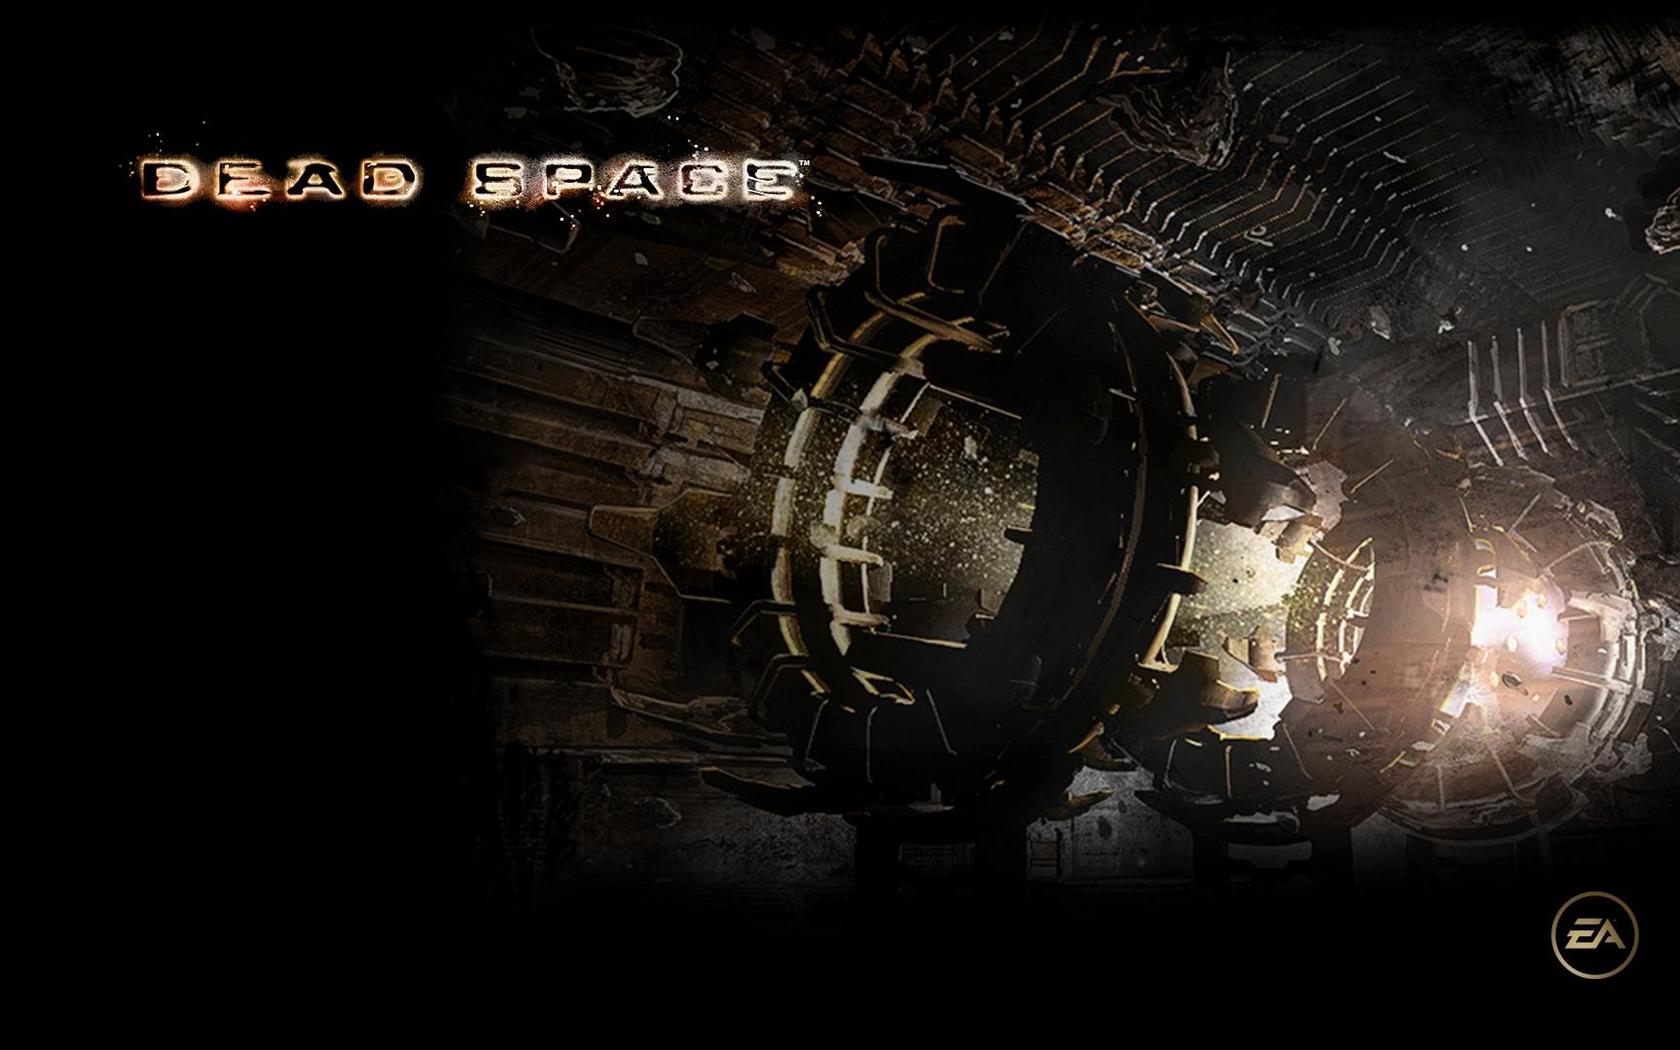 Pin 1366x768 Dead Space 2 Wallpaper For Pc Mac Iphone And Ipad on